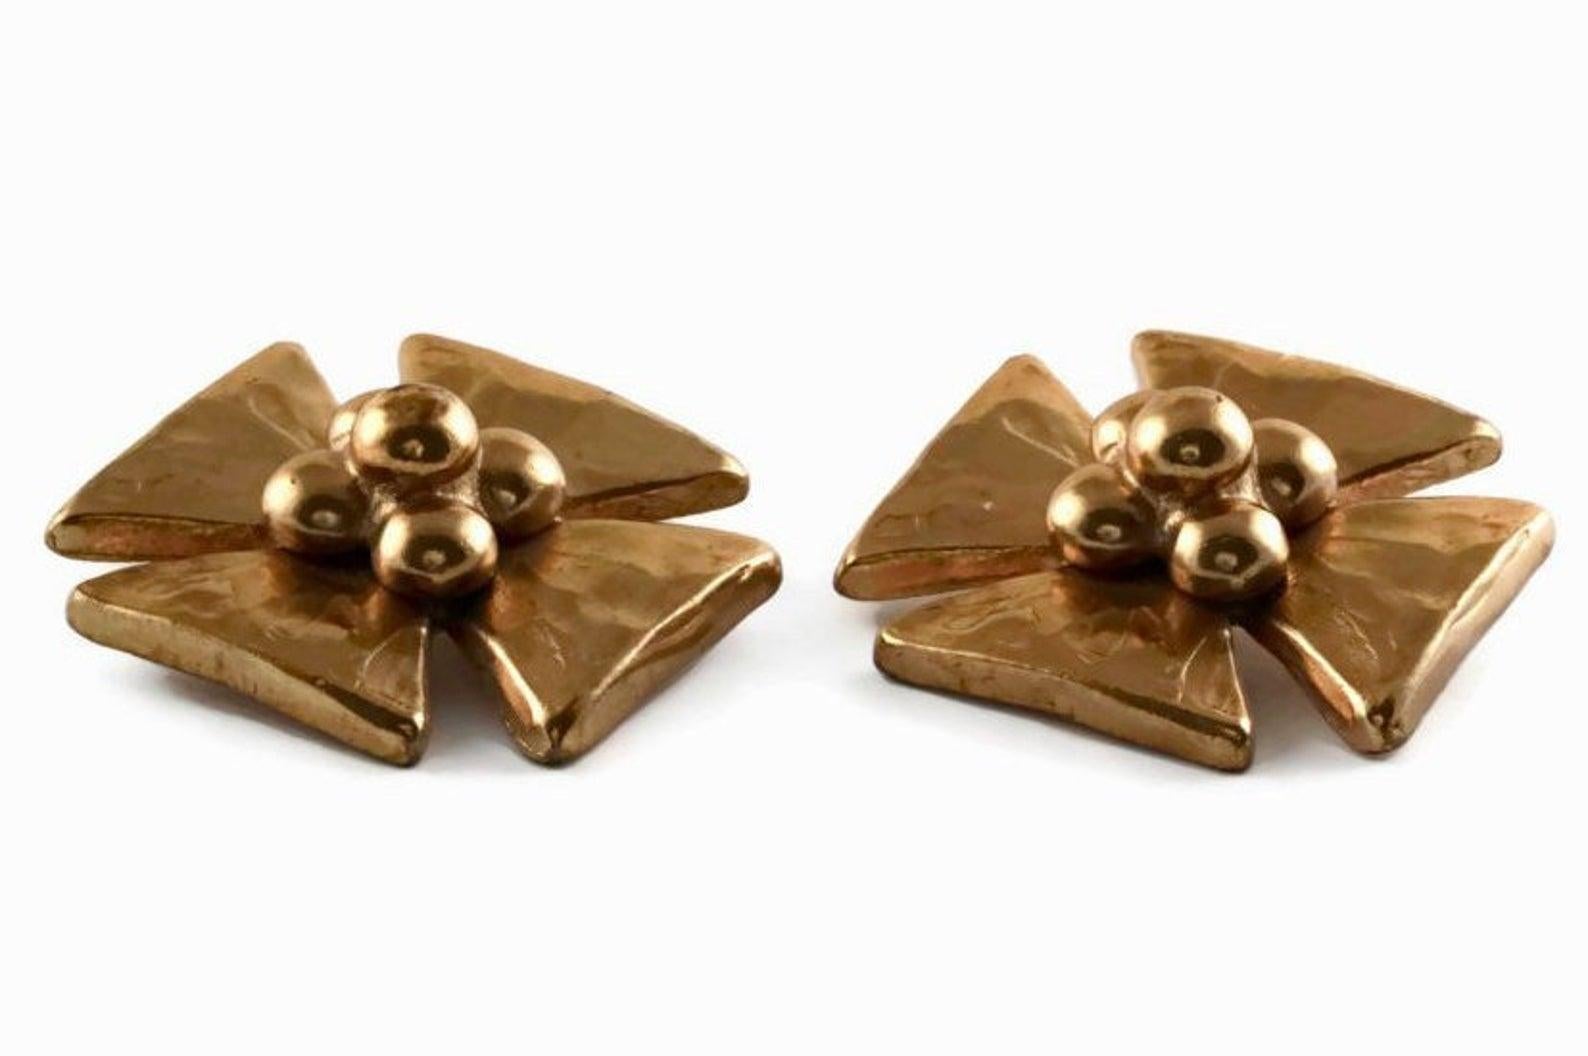 Vintage Massive YSL Yves Saint Laurent Maltese Cross Flower Earrings

Measurements:
Height: 1 6/8 inches (4.44 cm)
Width: 1 6/8 inches (4.44 cm)

Features:
- 100% Authentic YVES SAINT LAURENT.
- Massive maltese cross earrings with flower at the